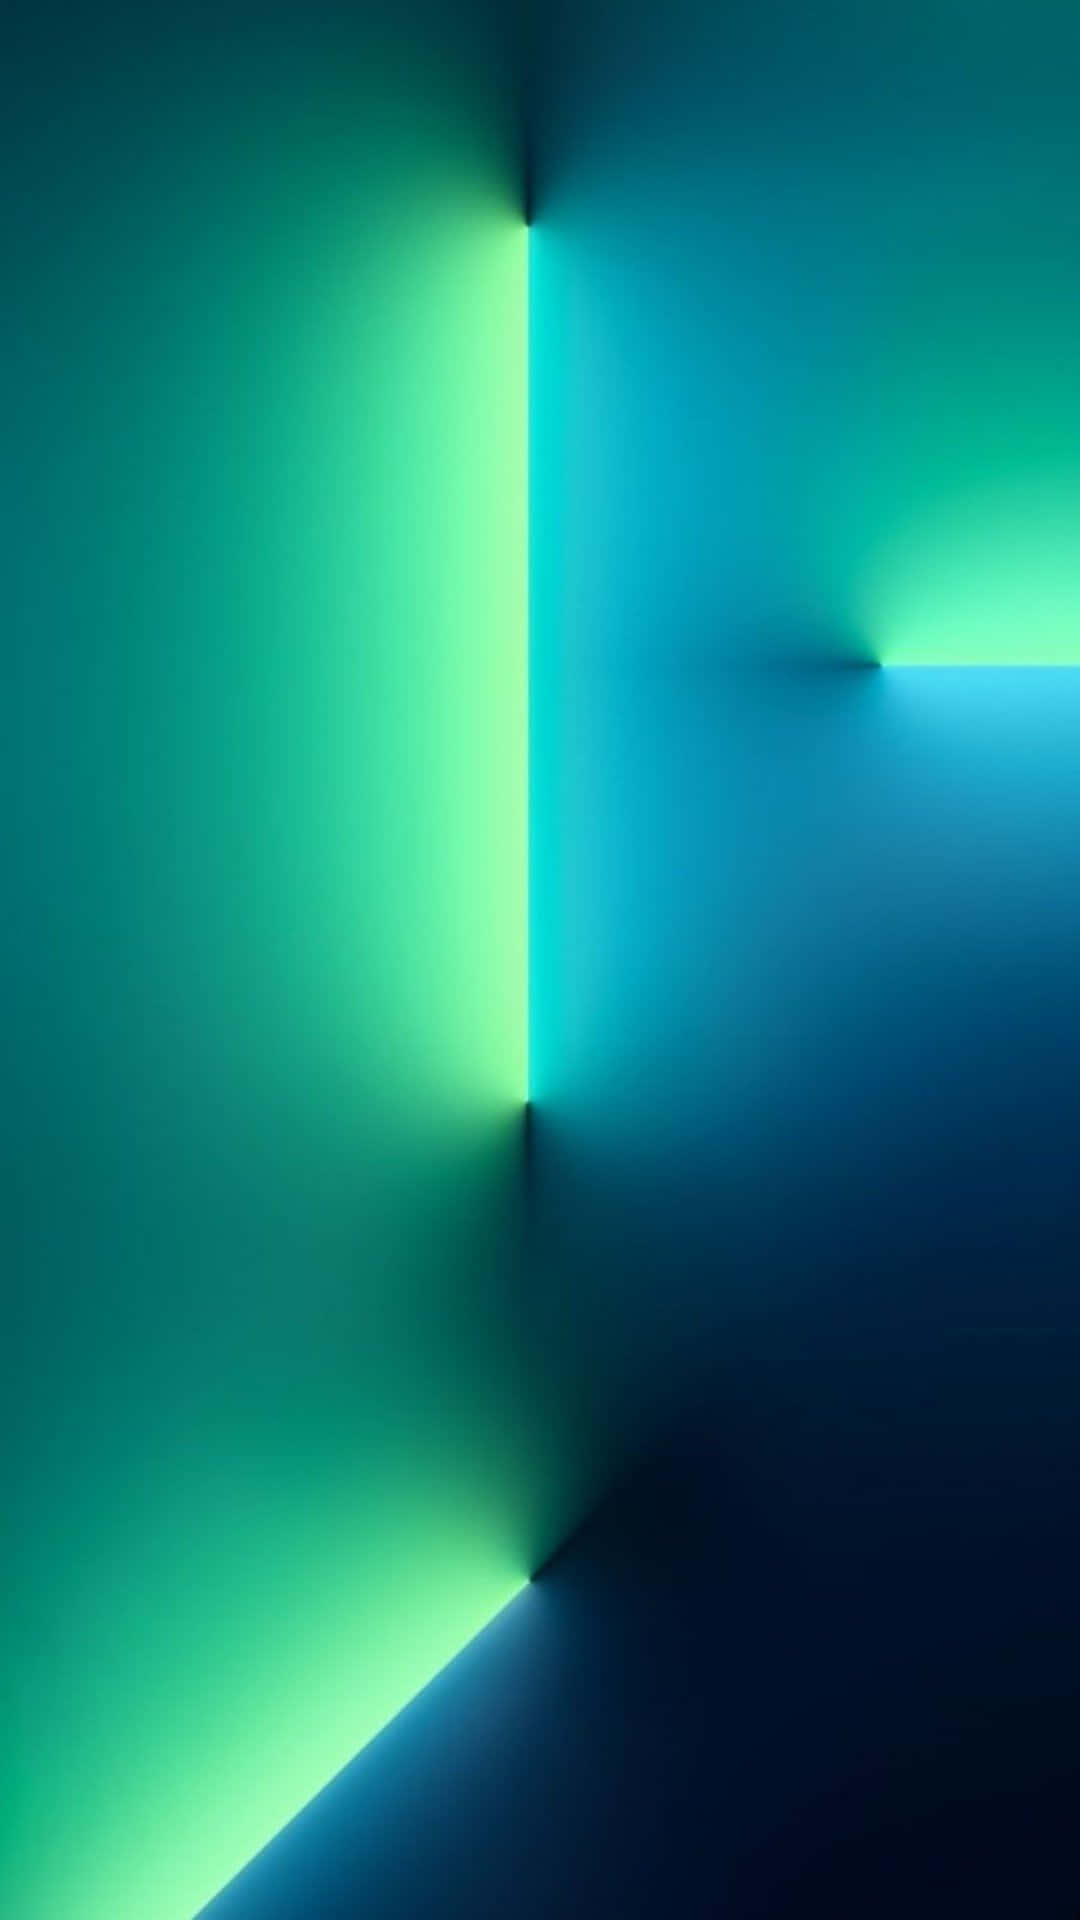 Blue And Green Led Lights Wallpaper